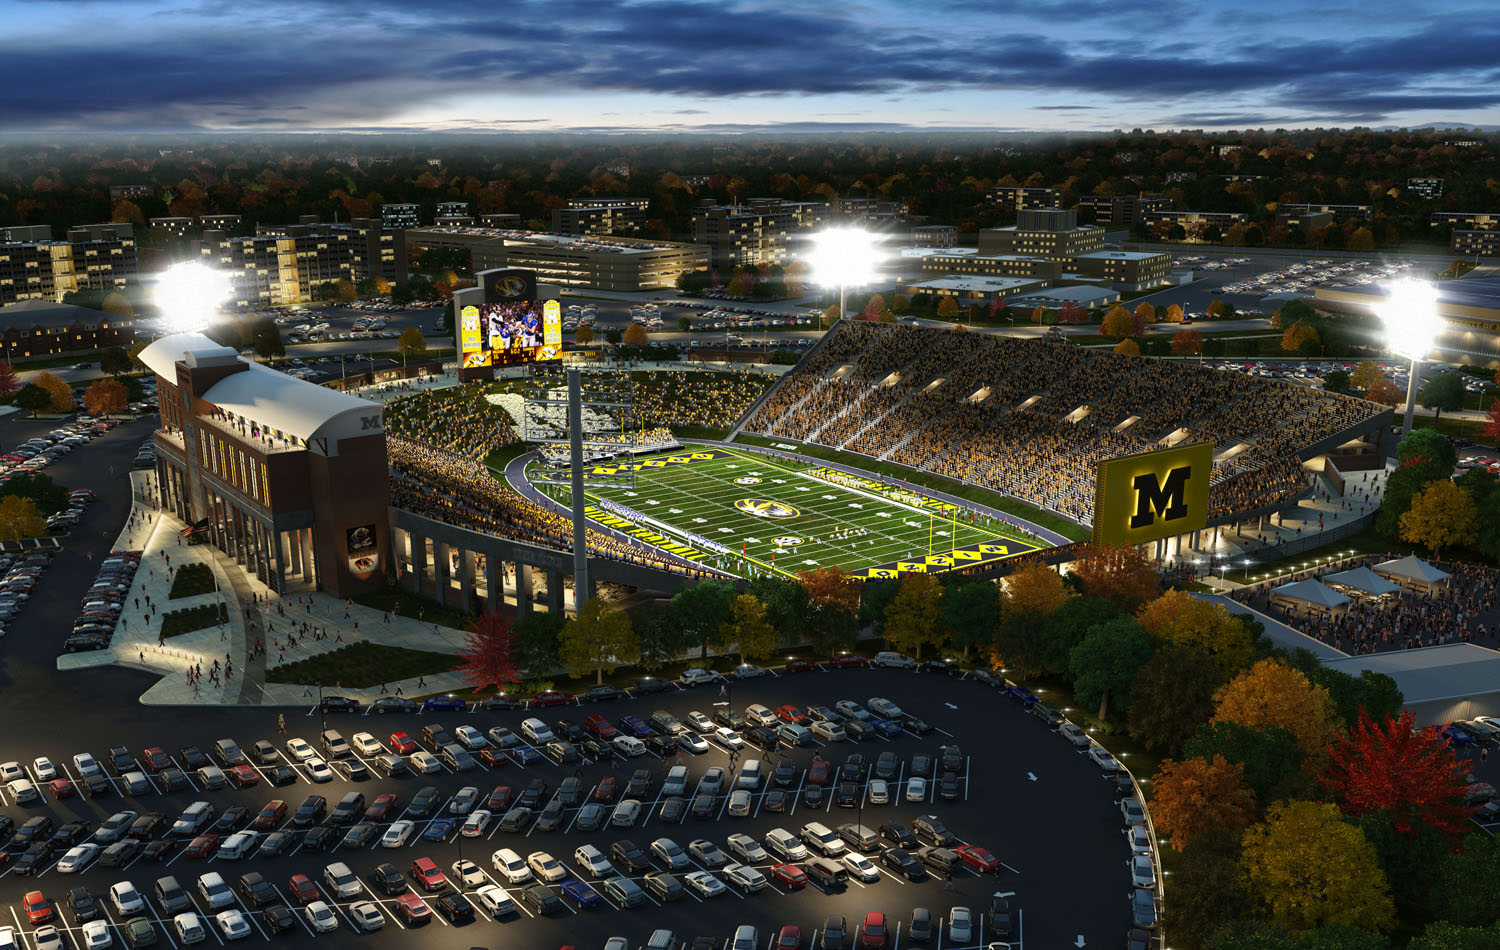 3D Stadium renderings often include the parking lot in the foreground.